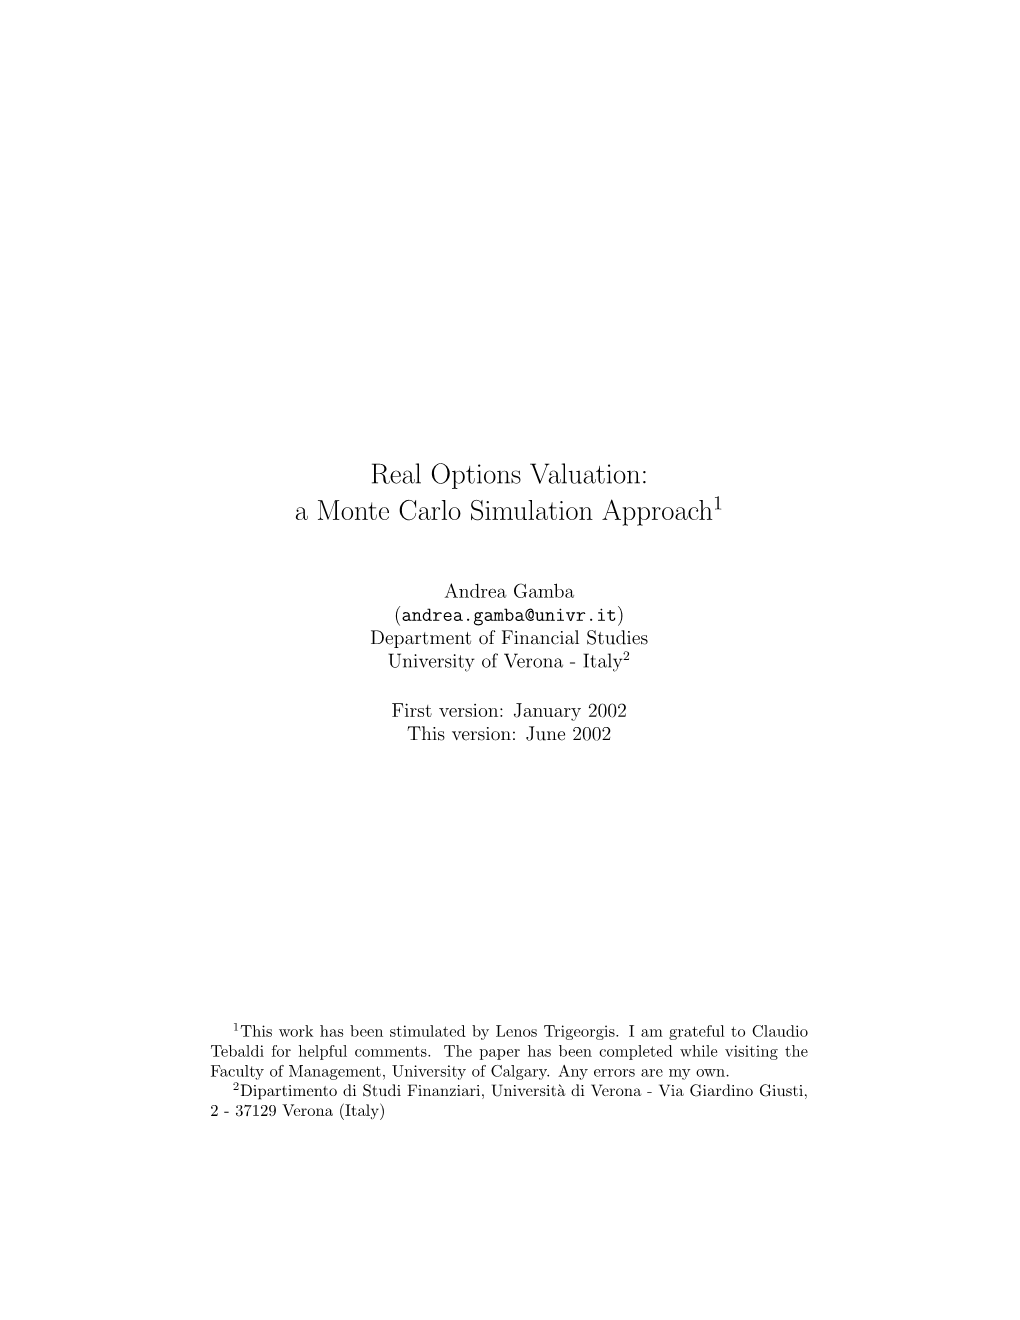 Real Options Valuation: a Monte Carlo Simulation Approach1